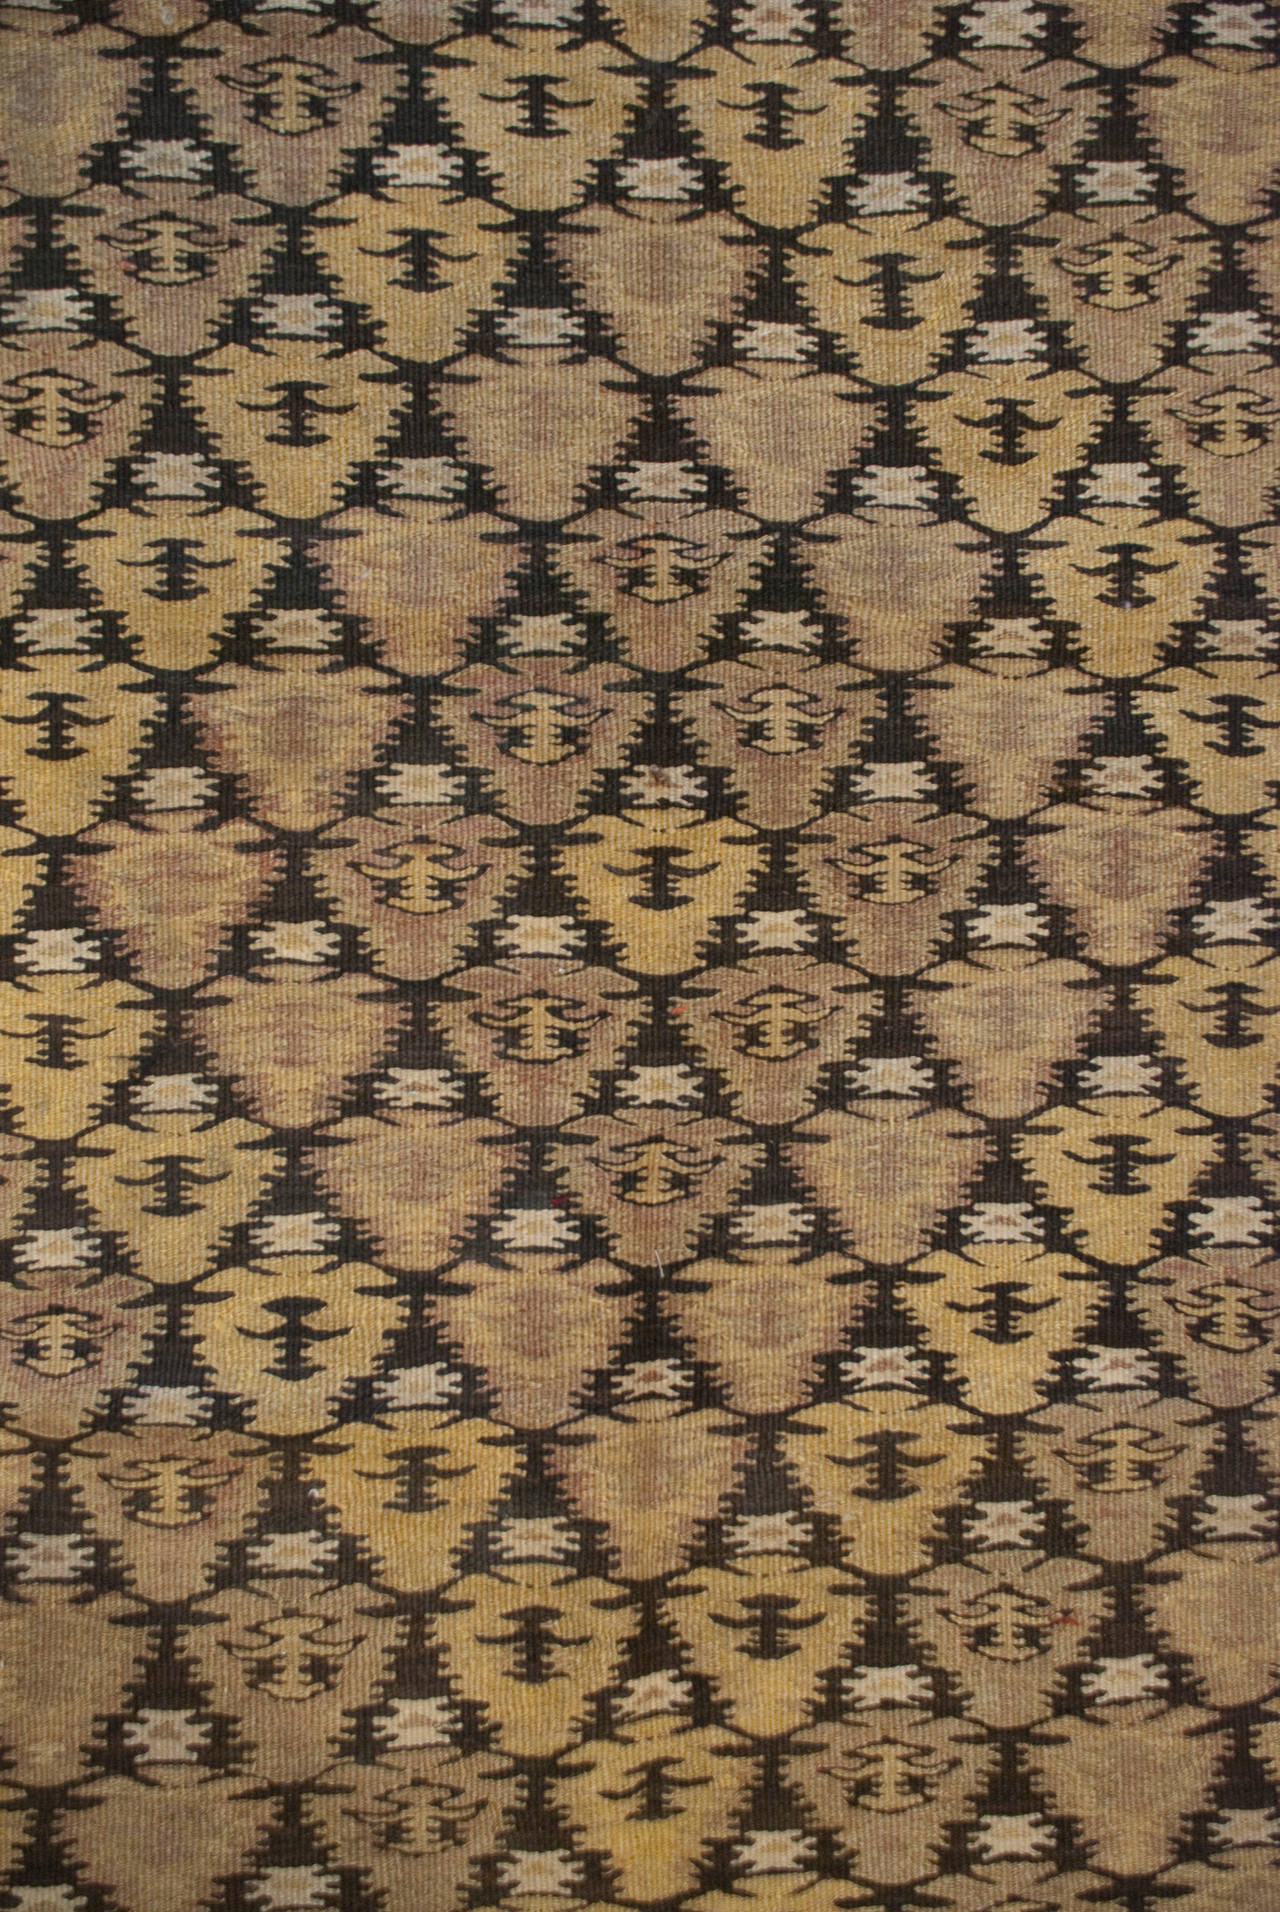 An early 20th century Persian Qazvin Kilim runner with all-over tree-of-life pattern surrounded by a complementary geometric border.